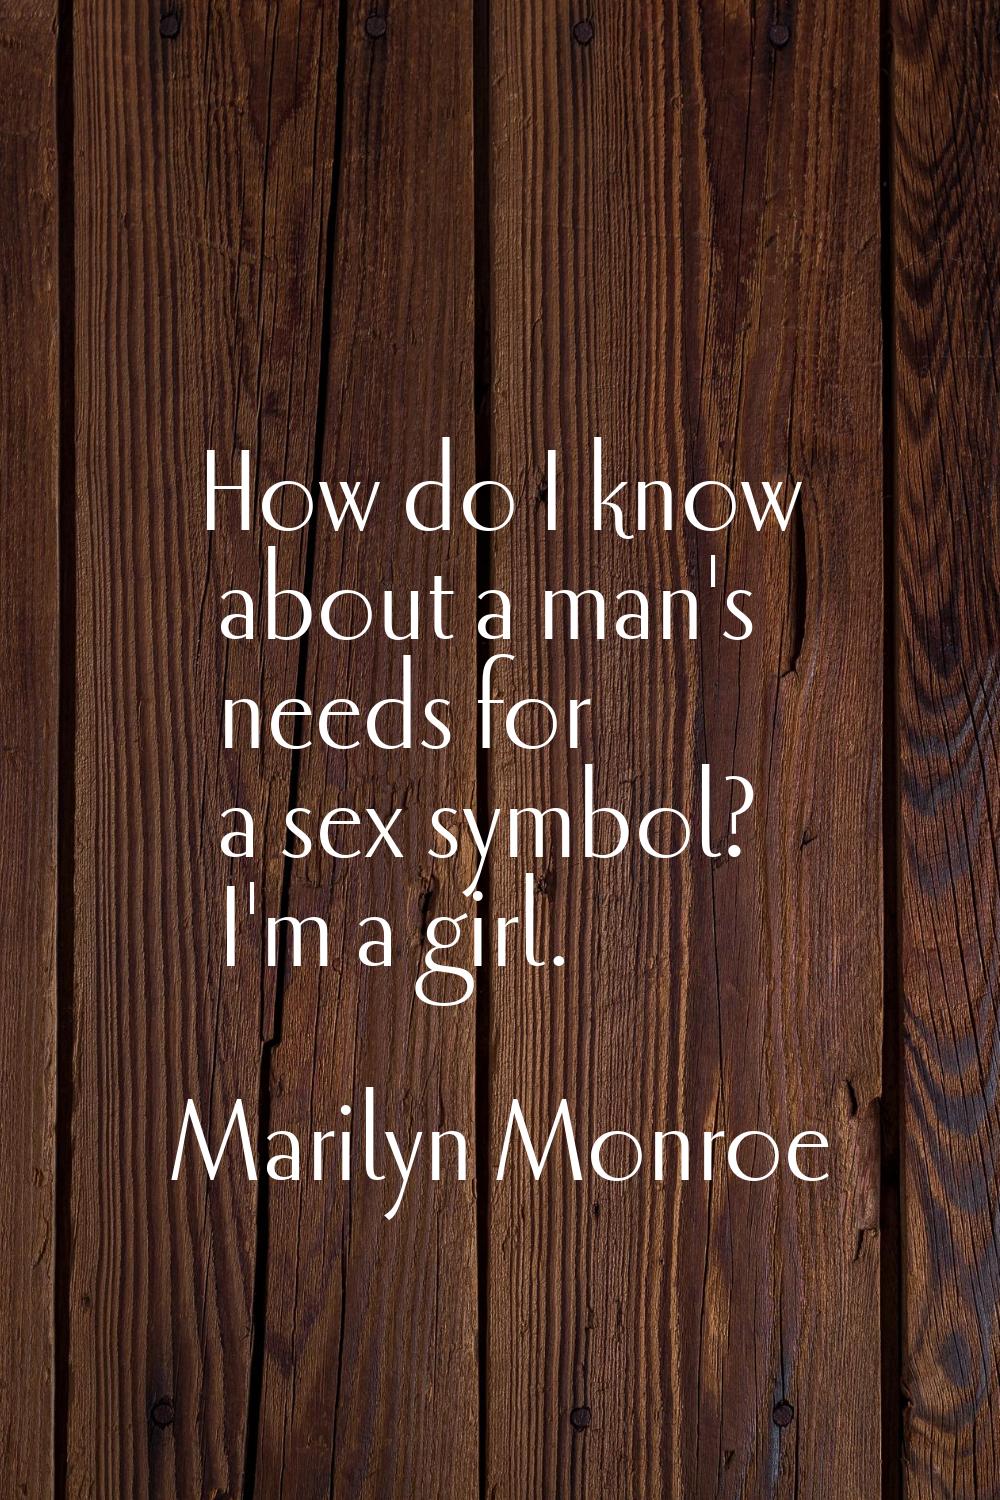 How do I know about a man's needs for a sex symbol? I'm a girl.